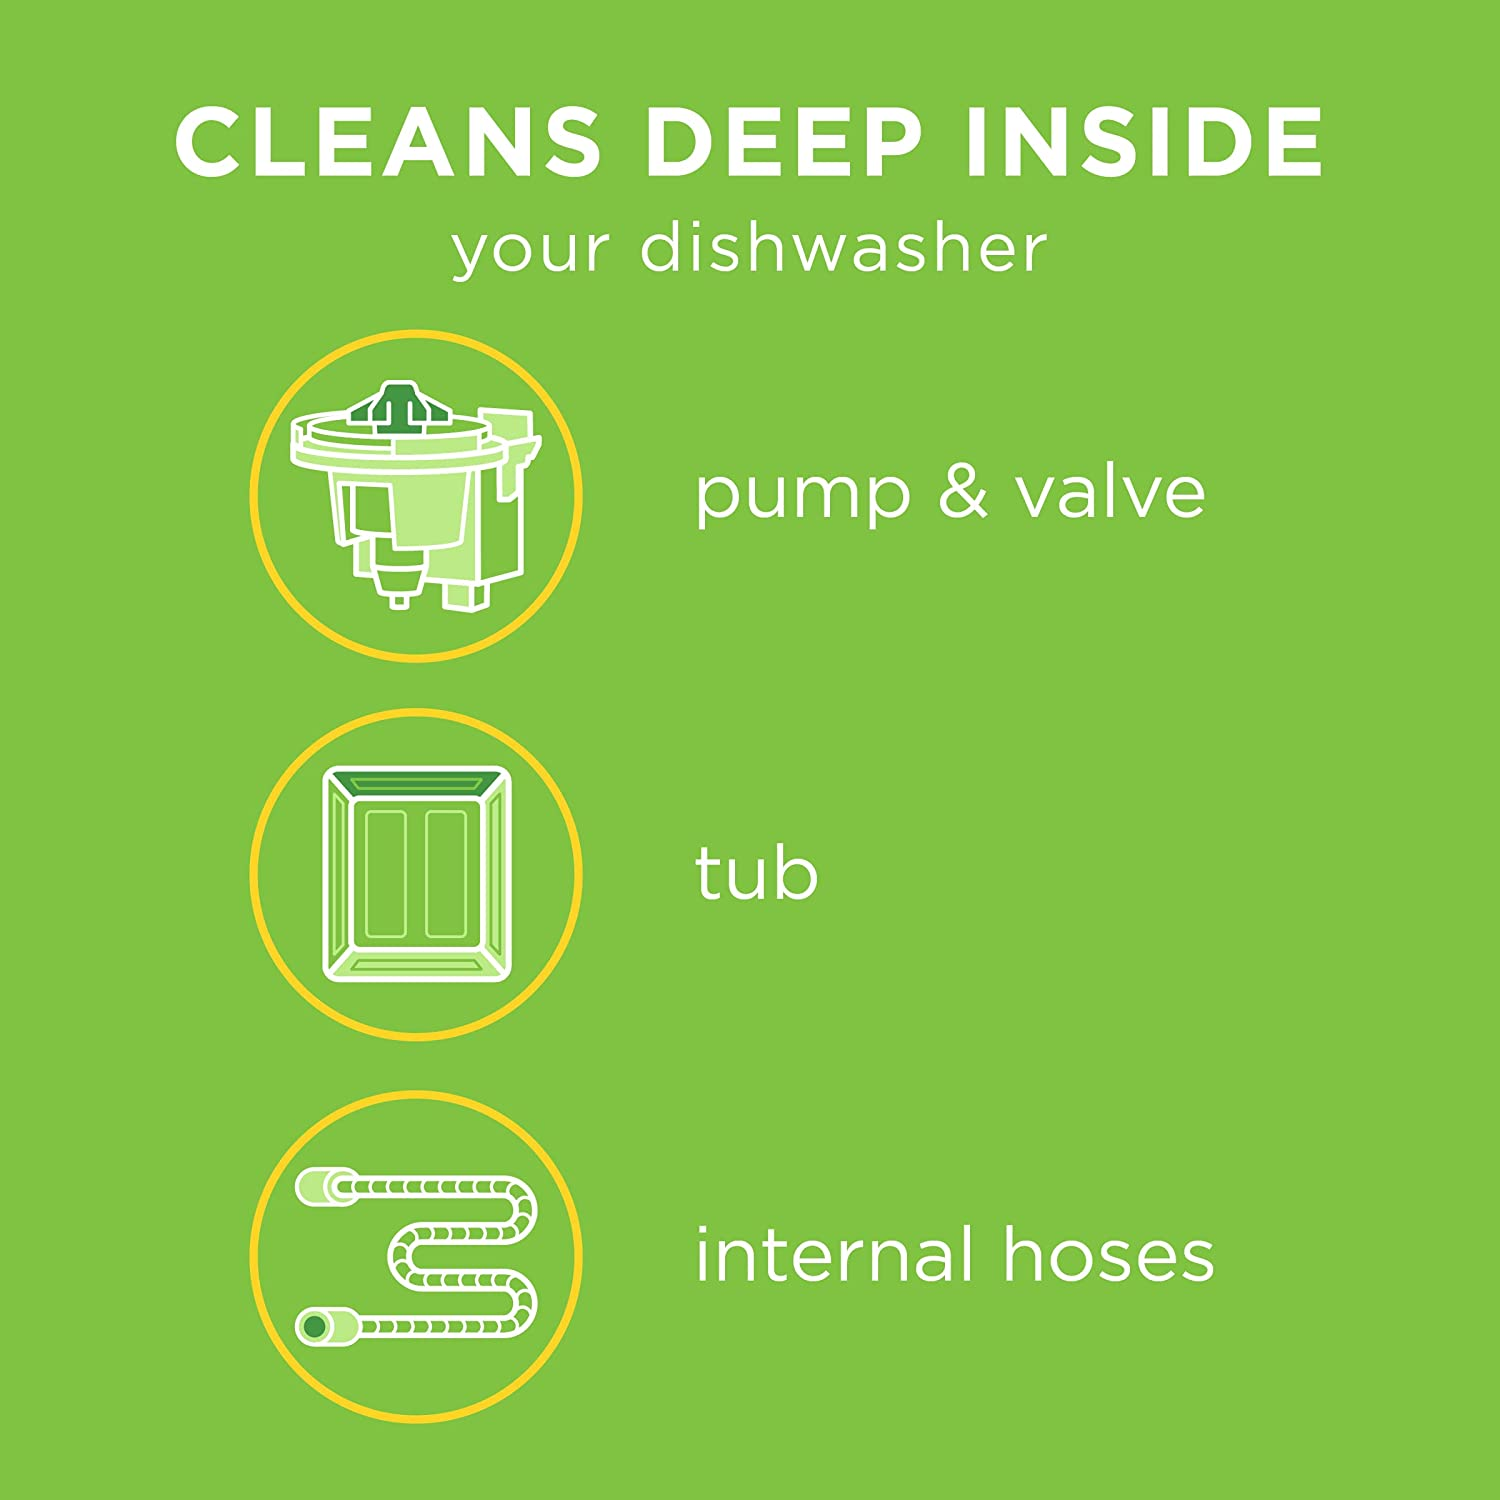 Dishwasher Cleaner, Helps Remove Limescale and Odor-Causing Residue, 6 Tablets